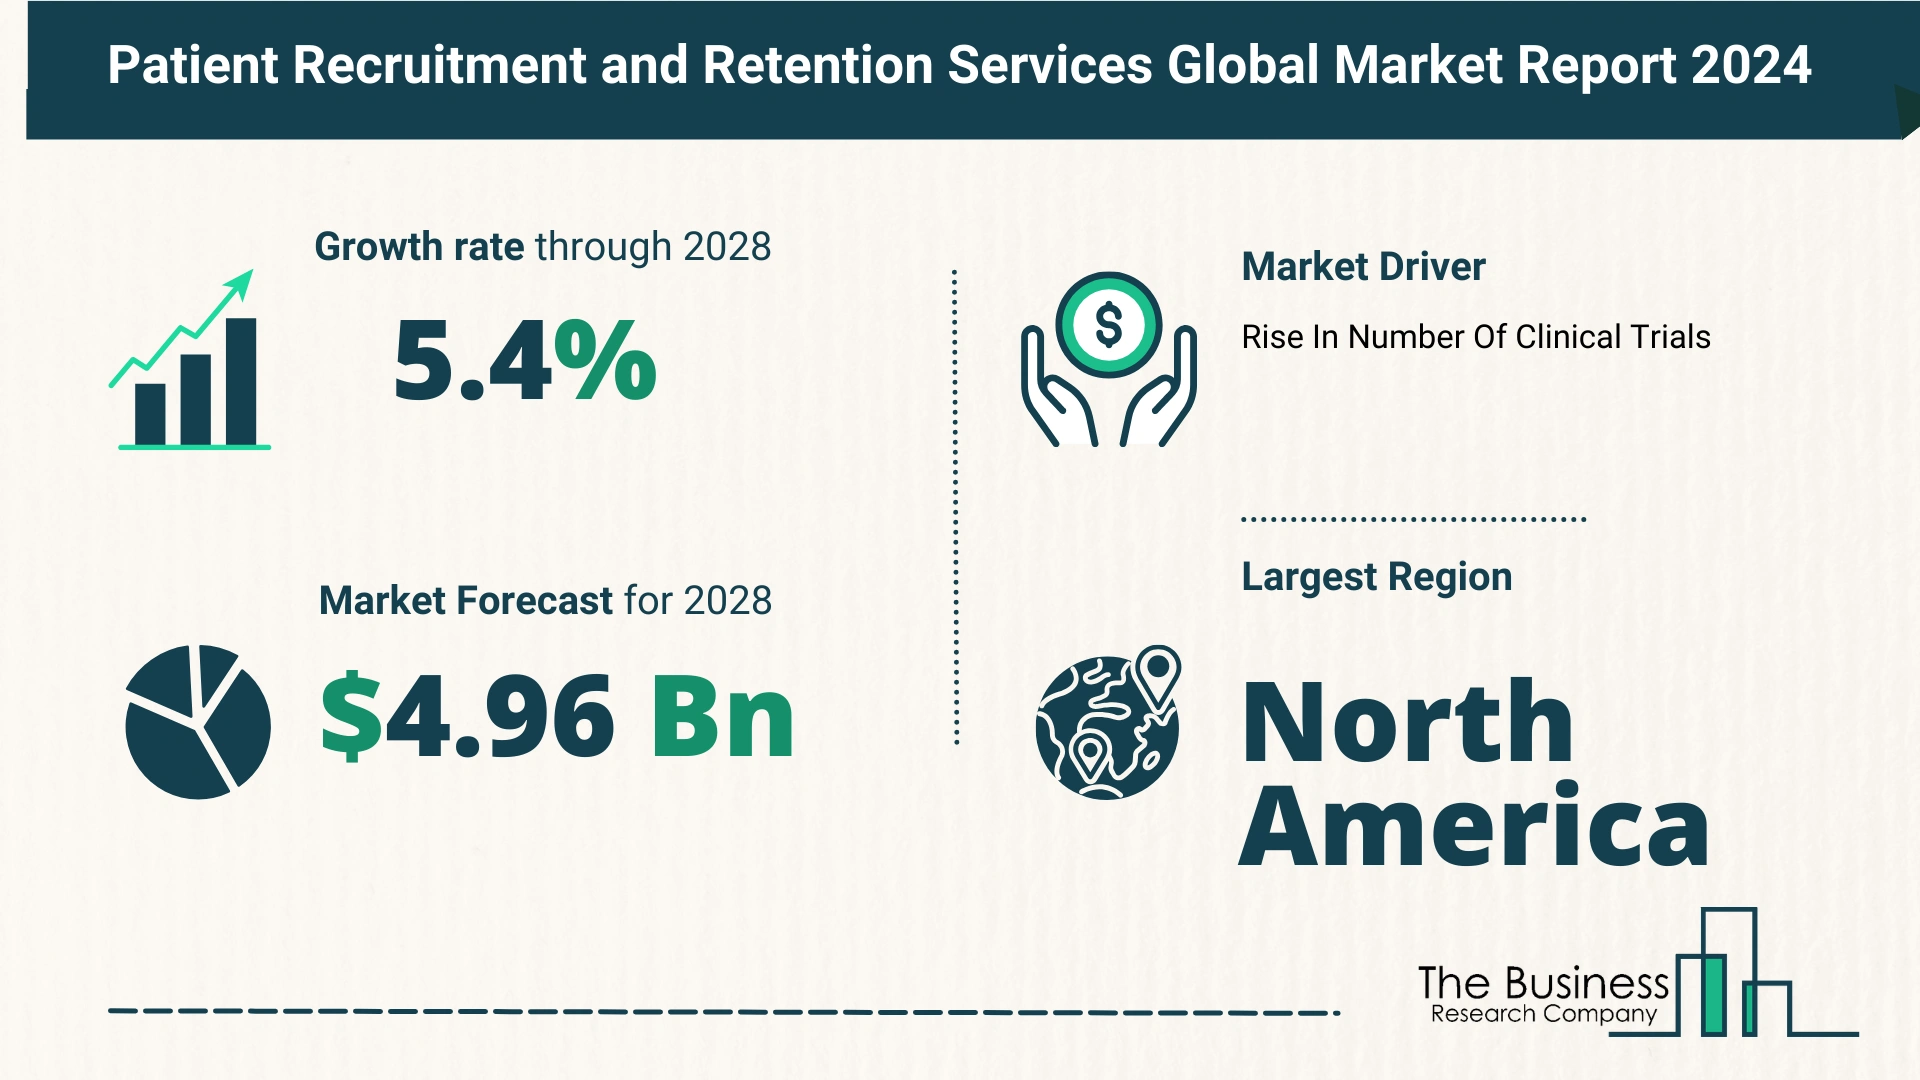 Key Trends And Drivers In The Patient Recruitment and Retention Services Market 2024